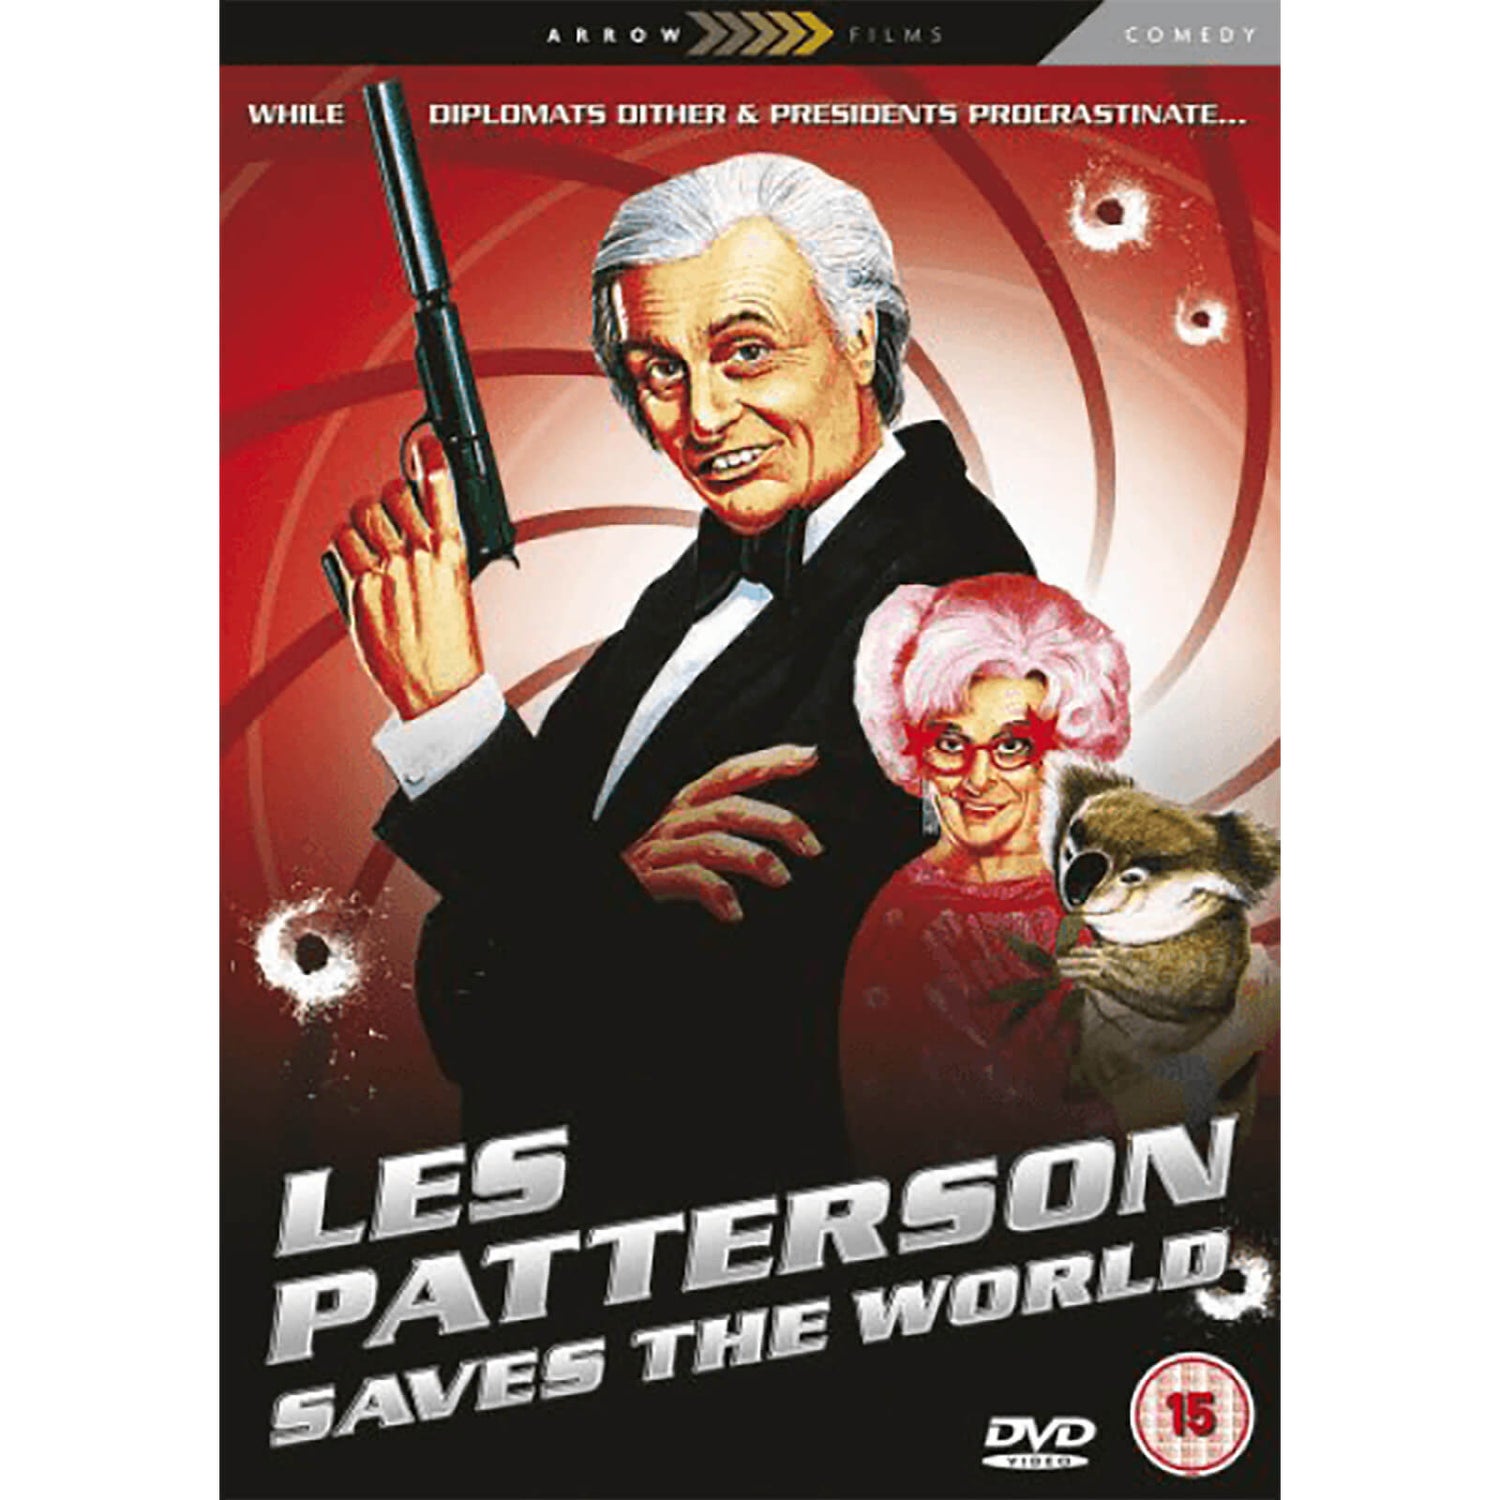 Les Patterson Saves The World